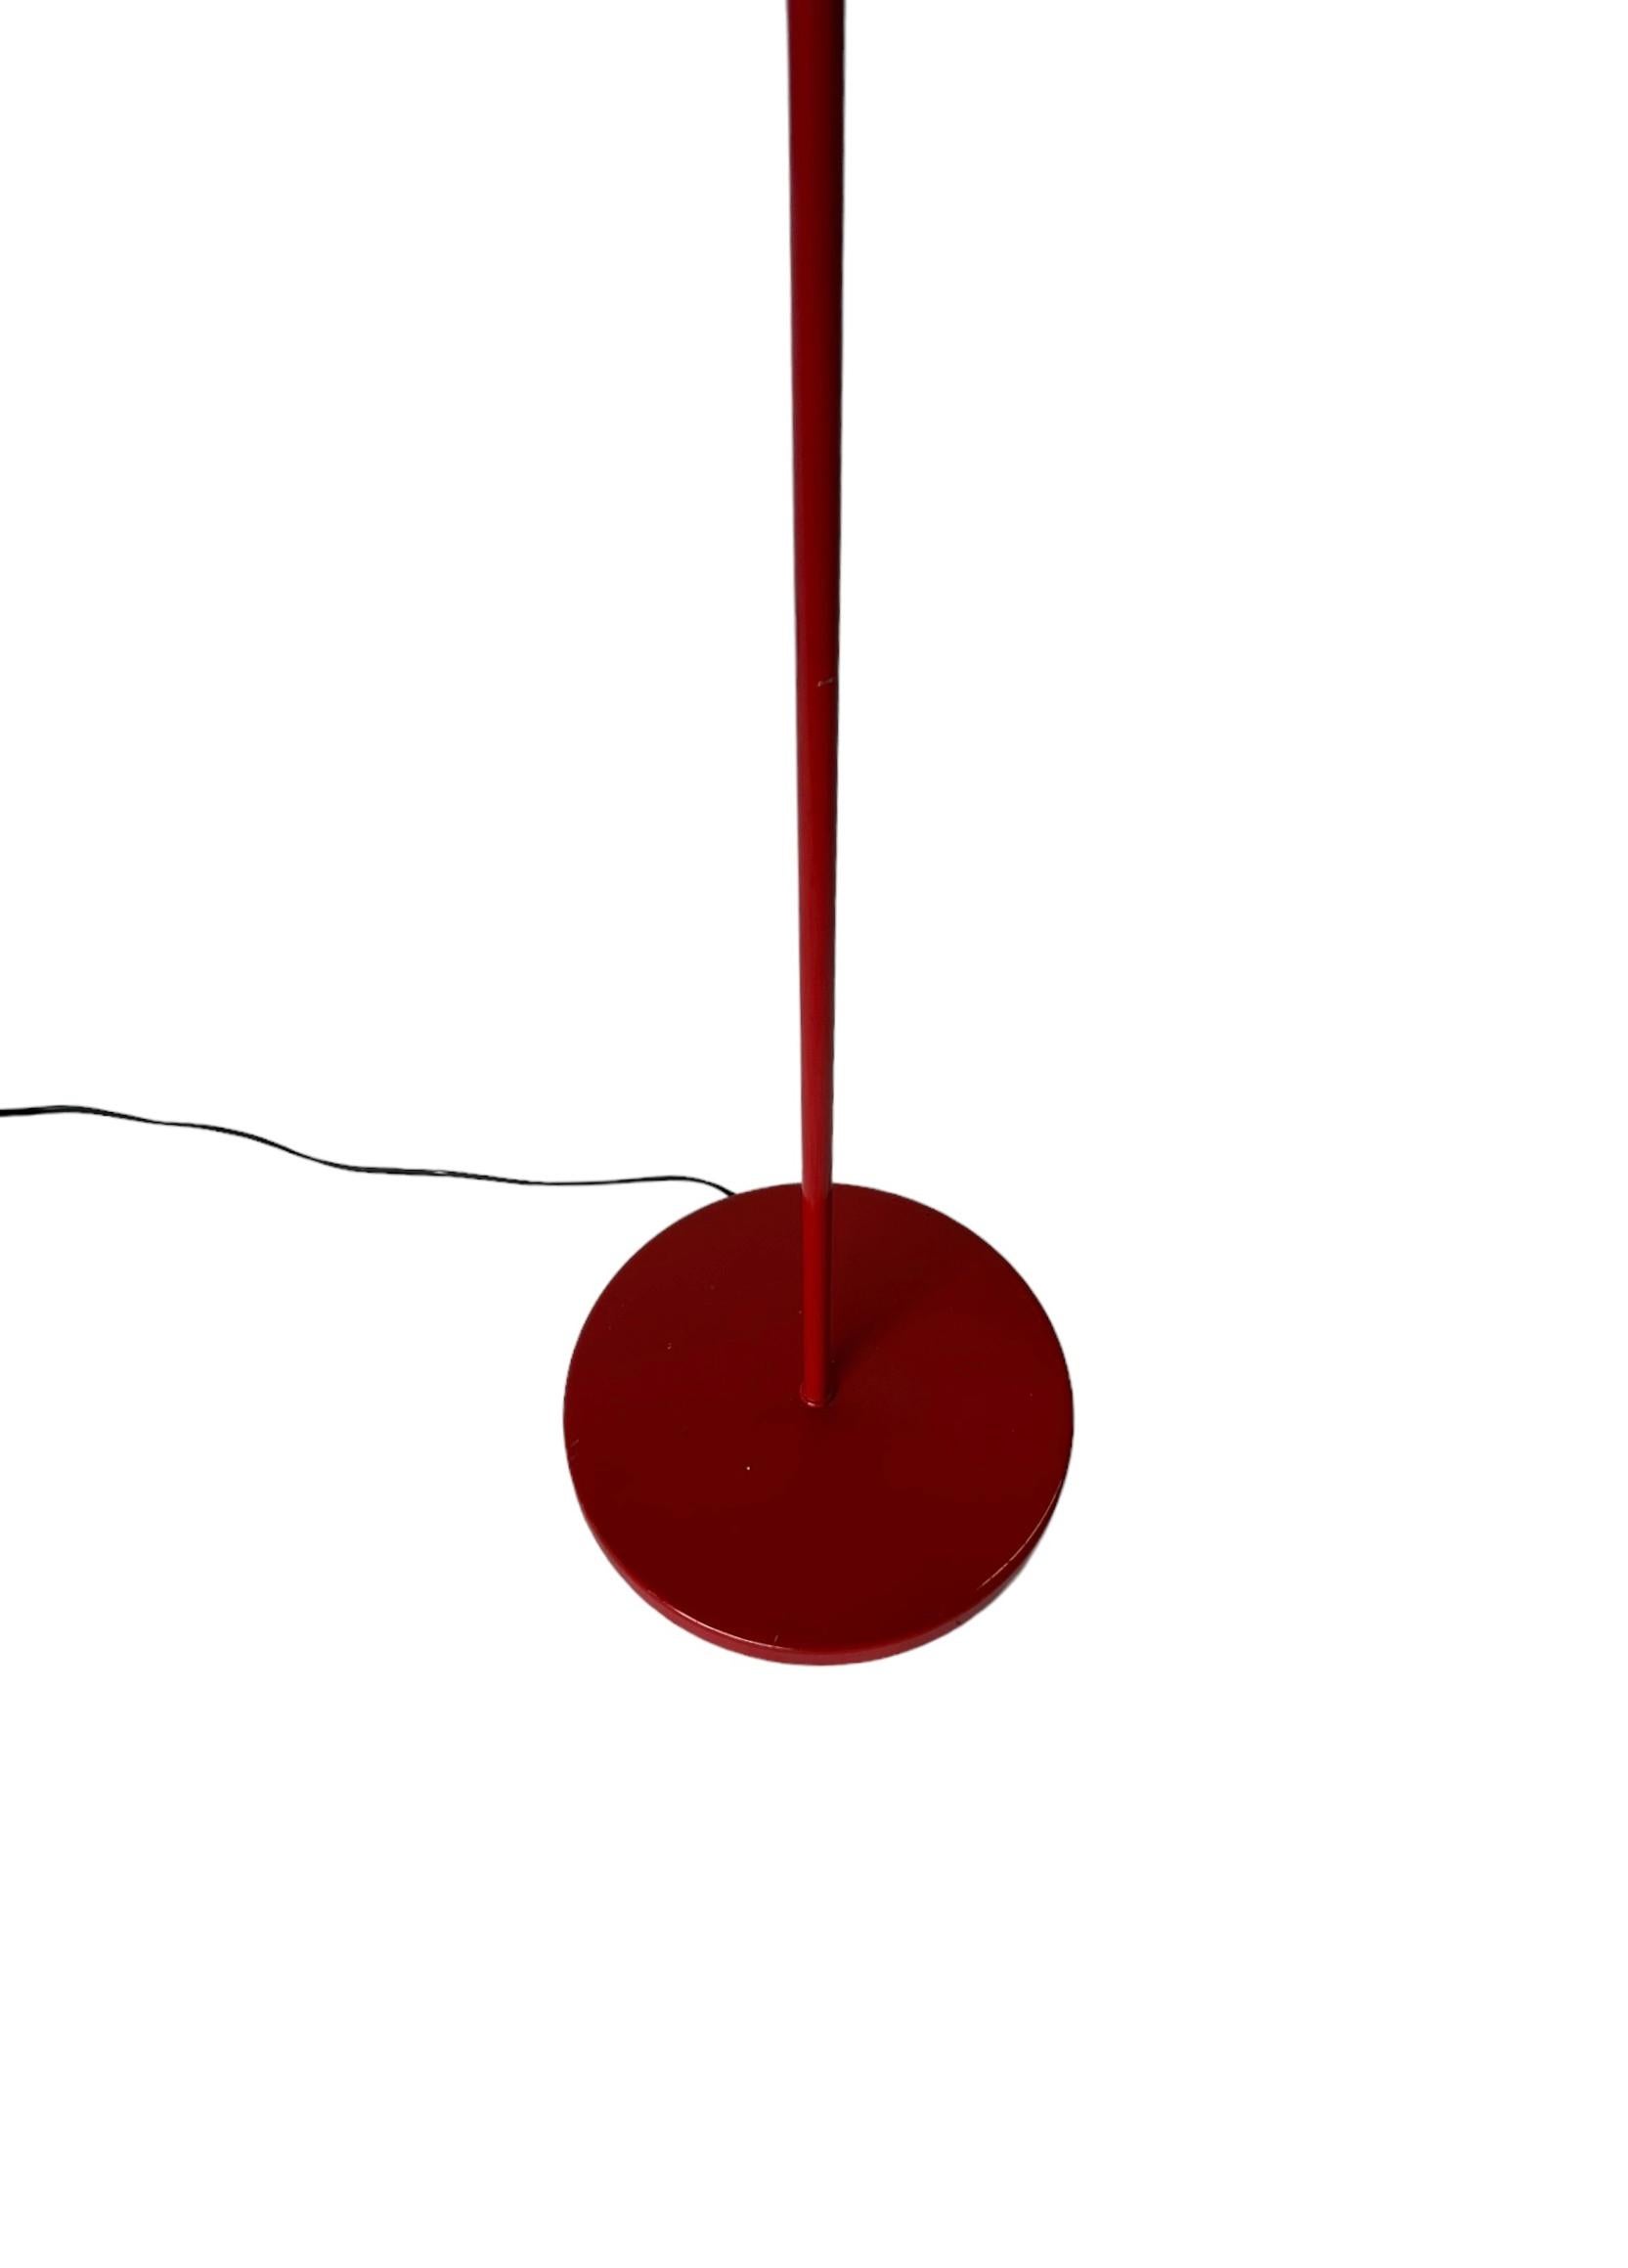 Cool minimalist floor lamp in red enamel. Bold tone with simple lines for a unique look. Available with lampshade for additional $99.